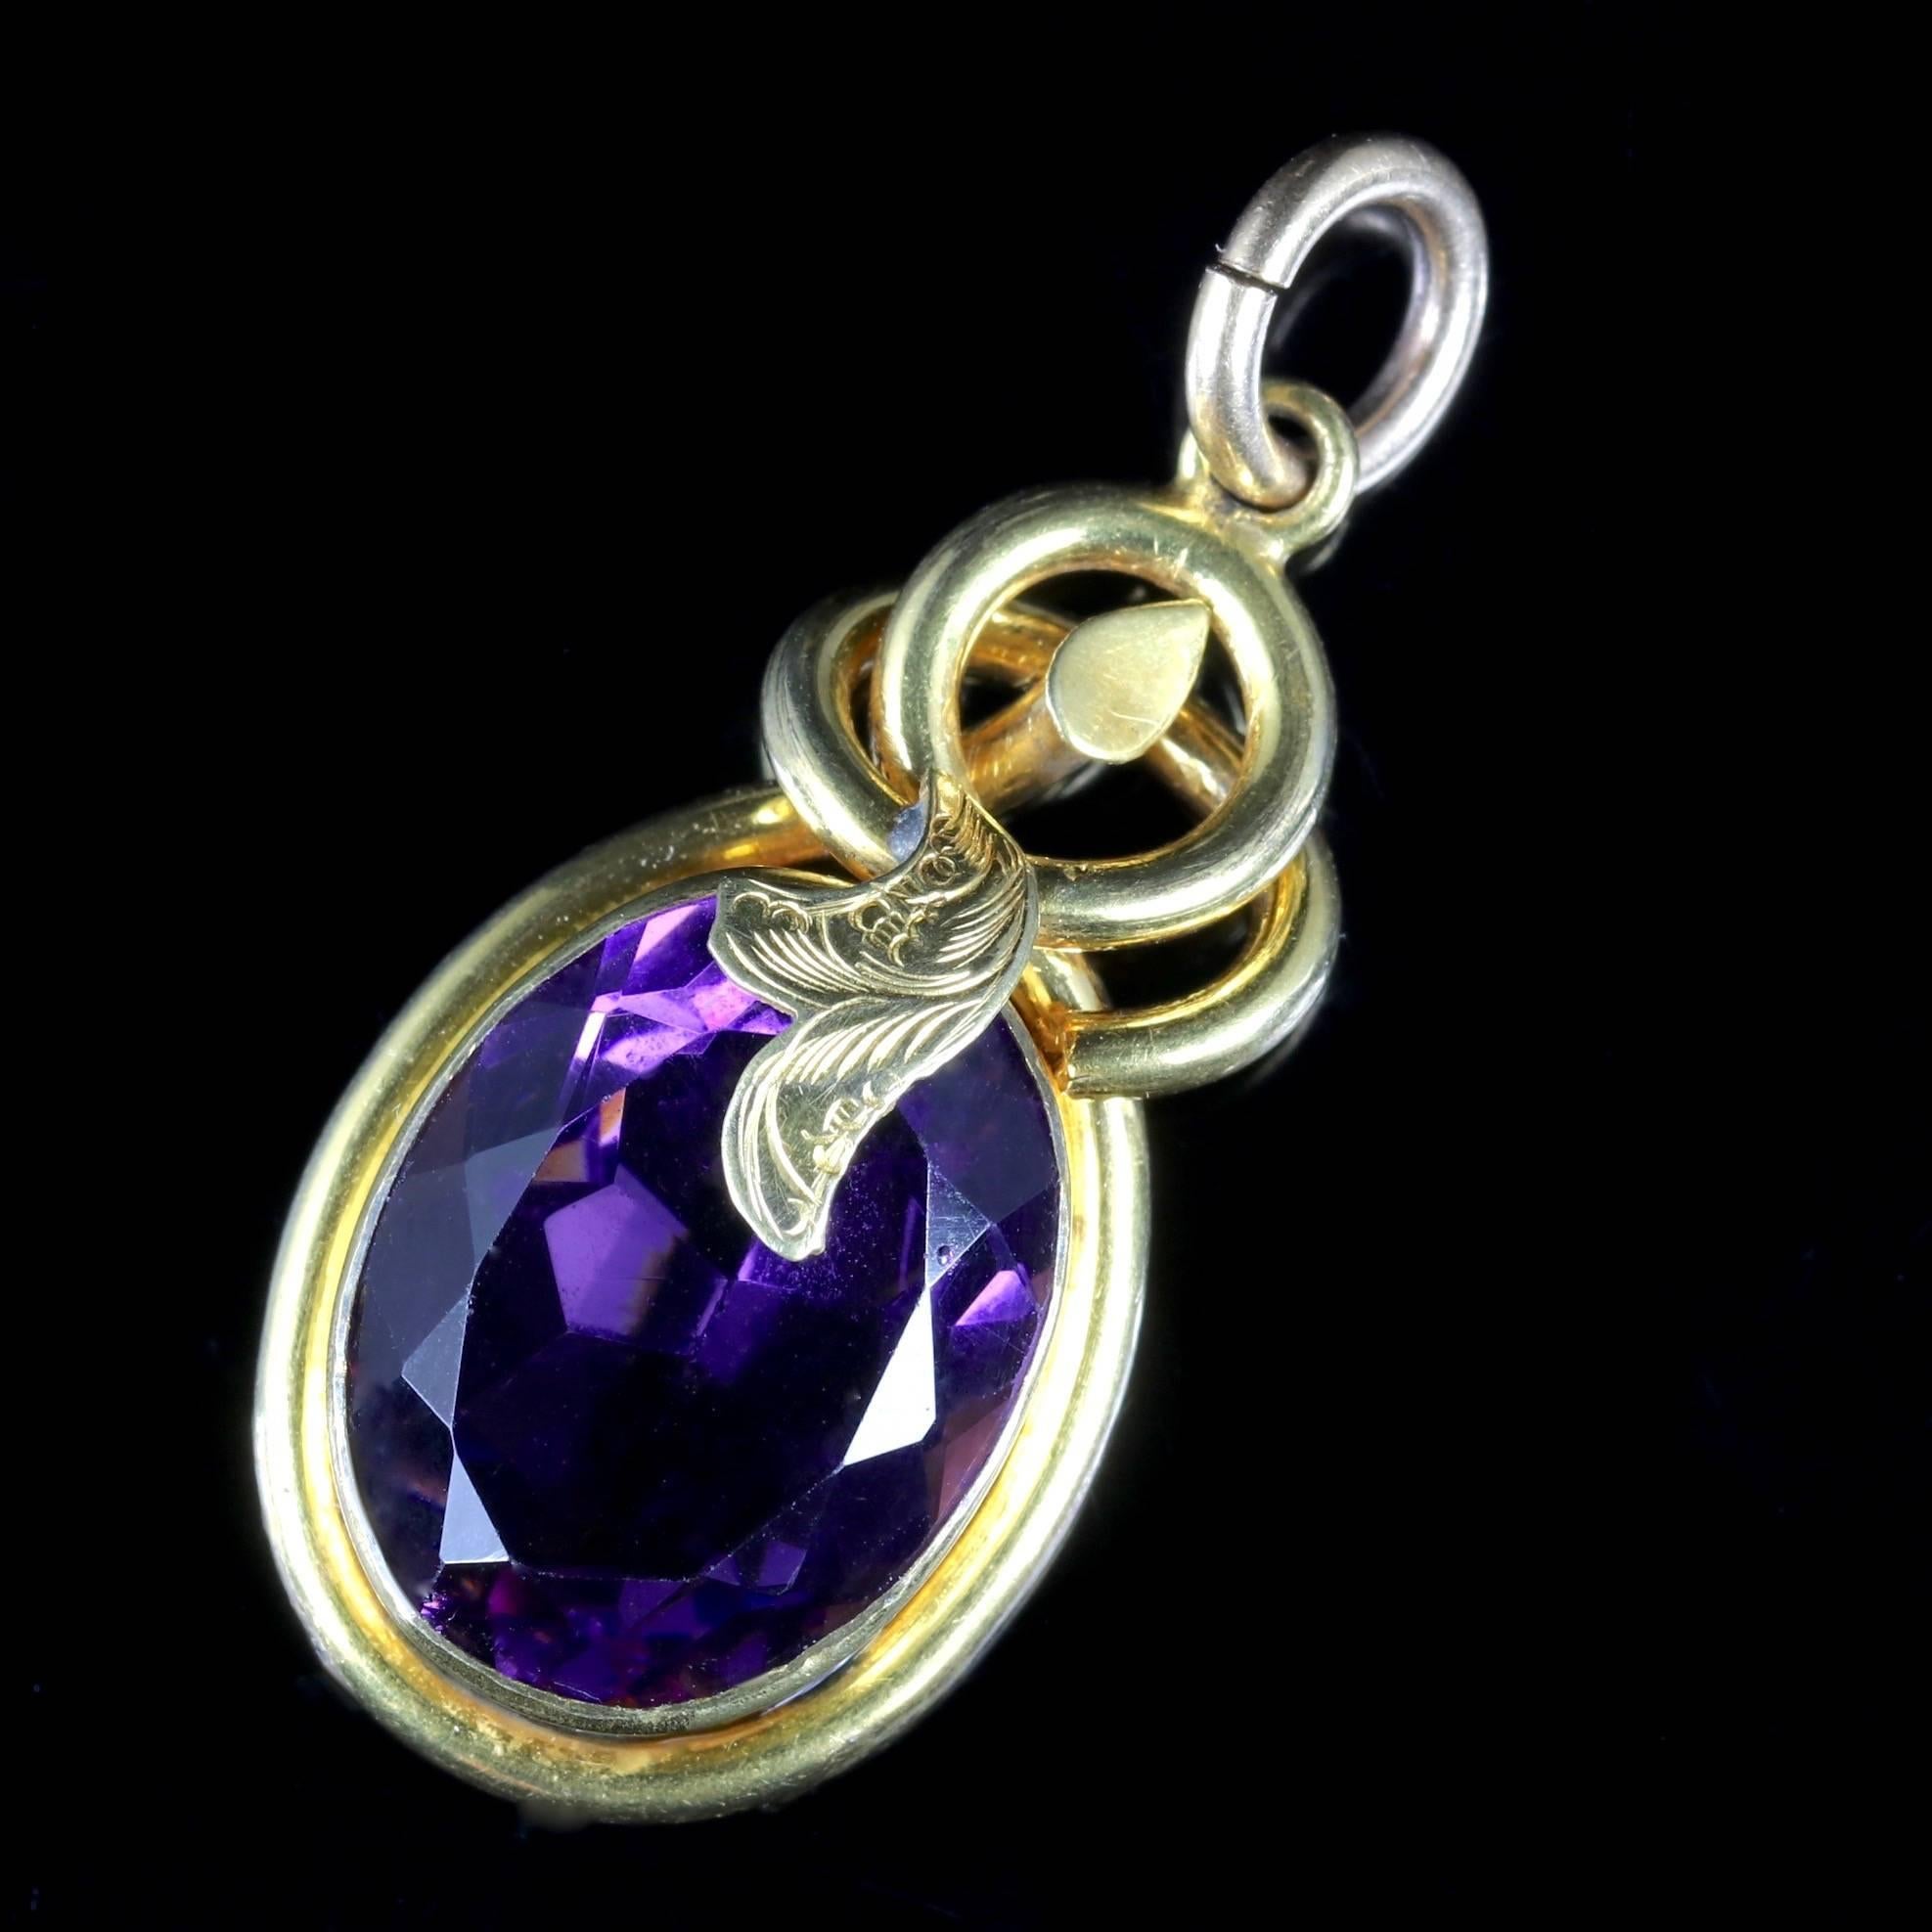 This fabulous Victorian pendant is set with a large deep purple Amethyst, Circa 1870.

Amethyst has been highly esteemed throughout the ages for its stunning beauty and legendary powers to stimulate, and soothe, the mind and emotions. 

The pendant